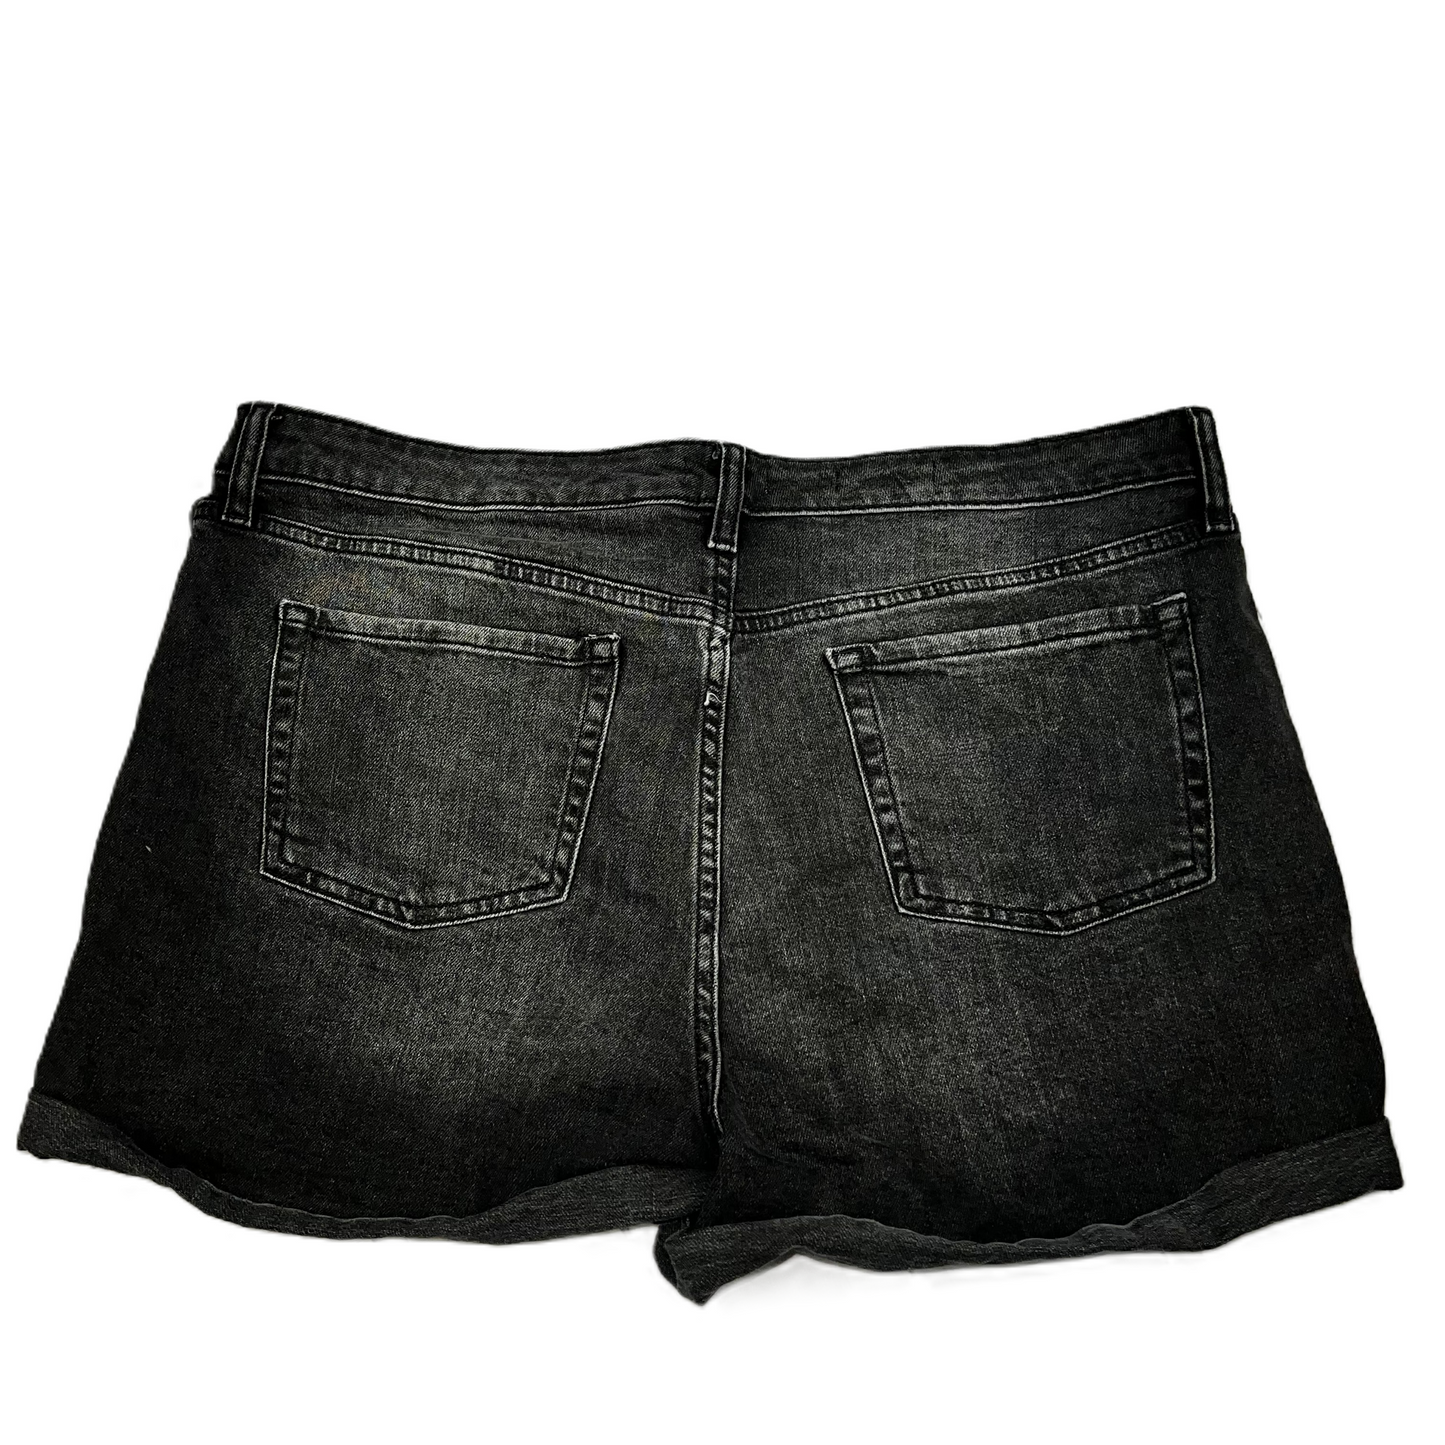 Black Denim Shorts By Wild Fable, Size: 16